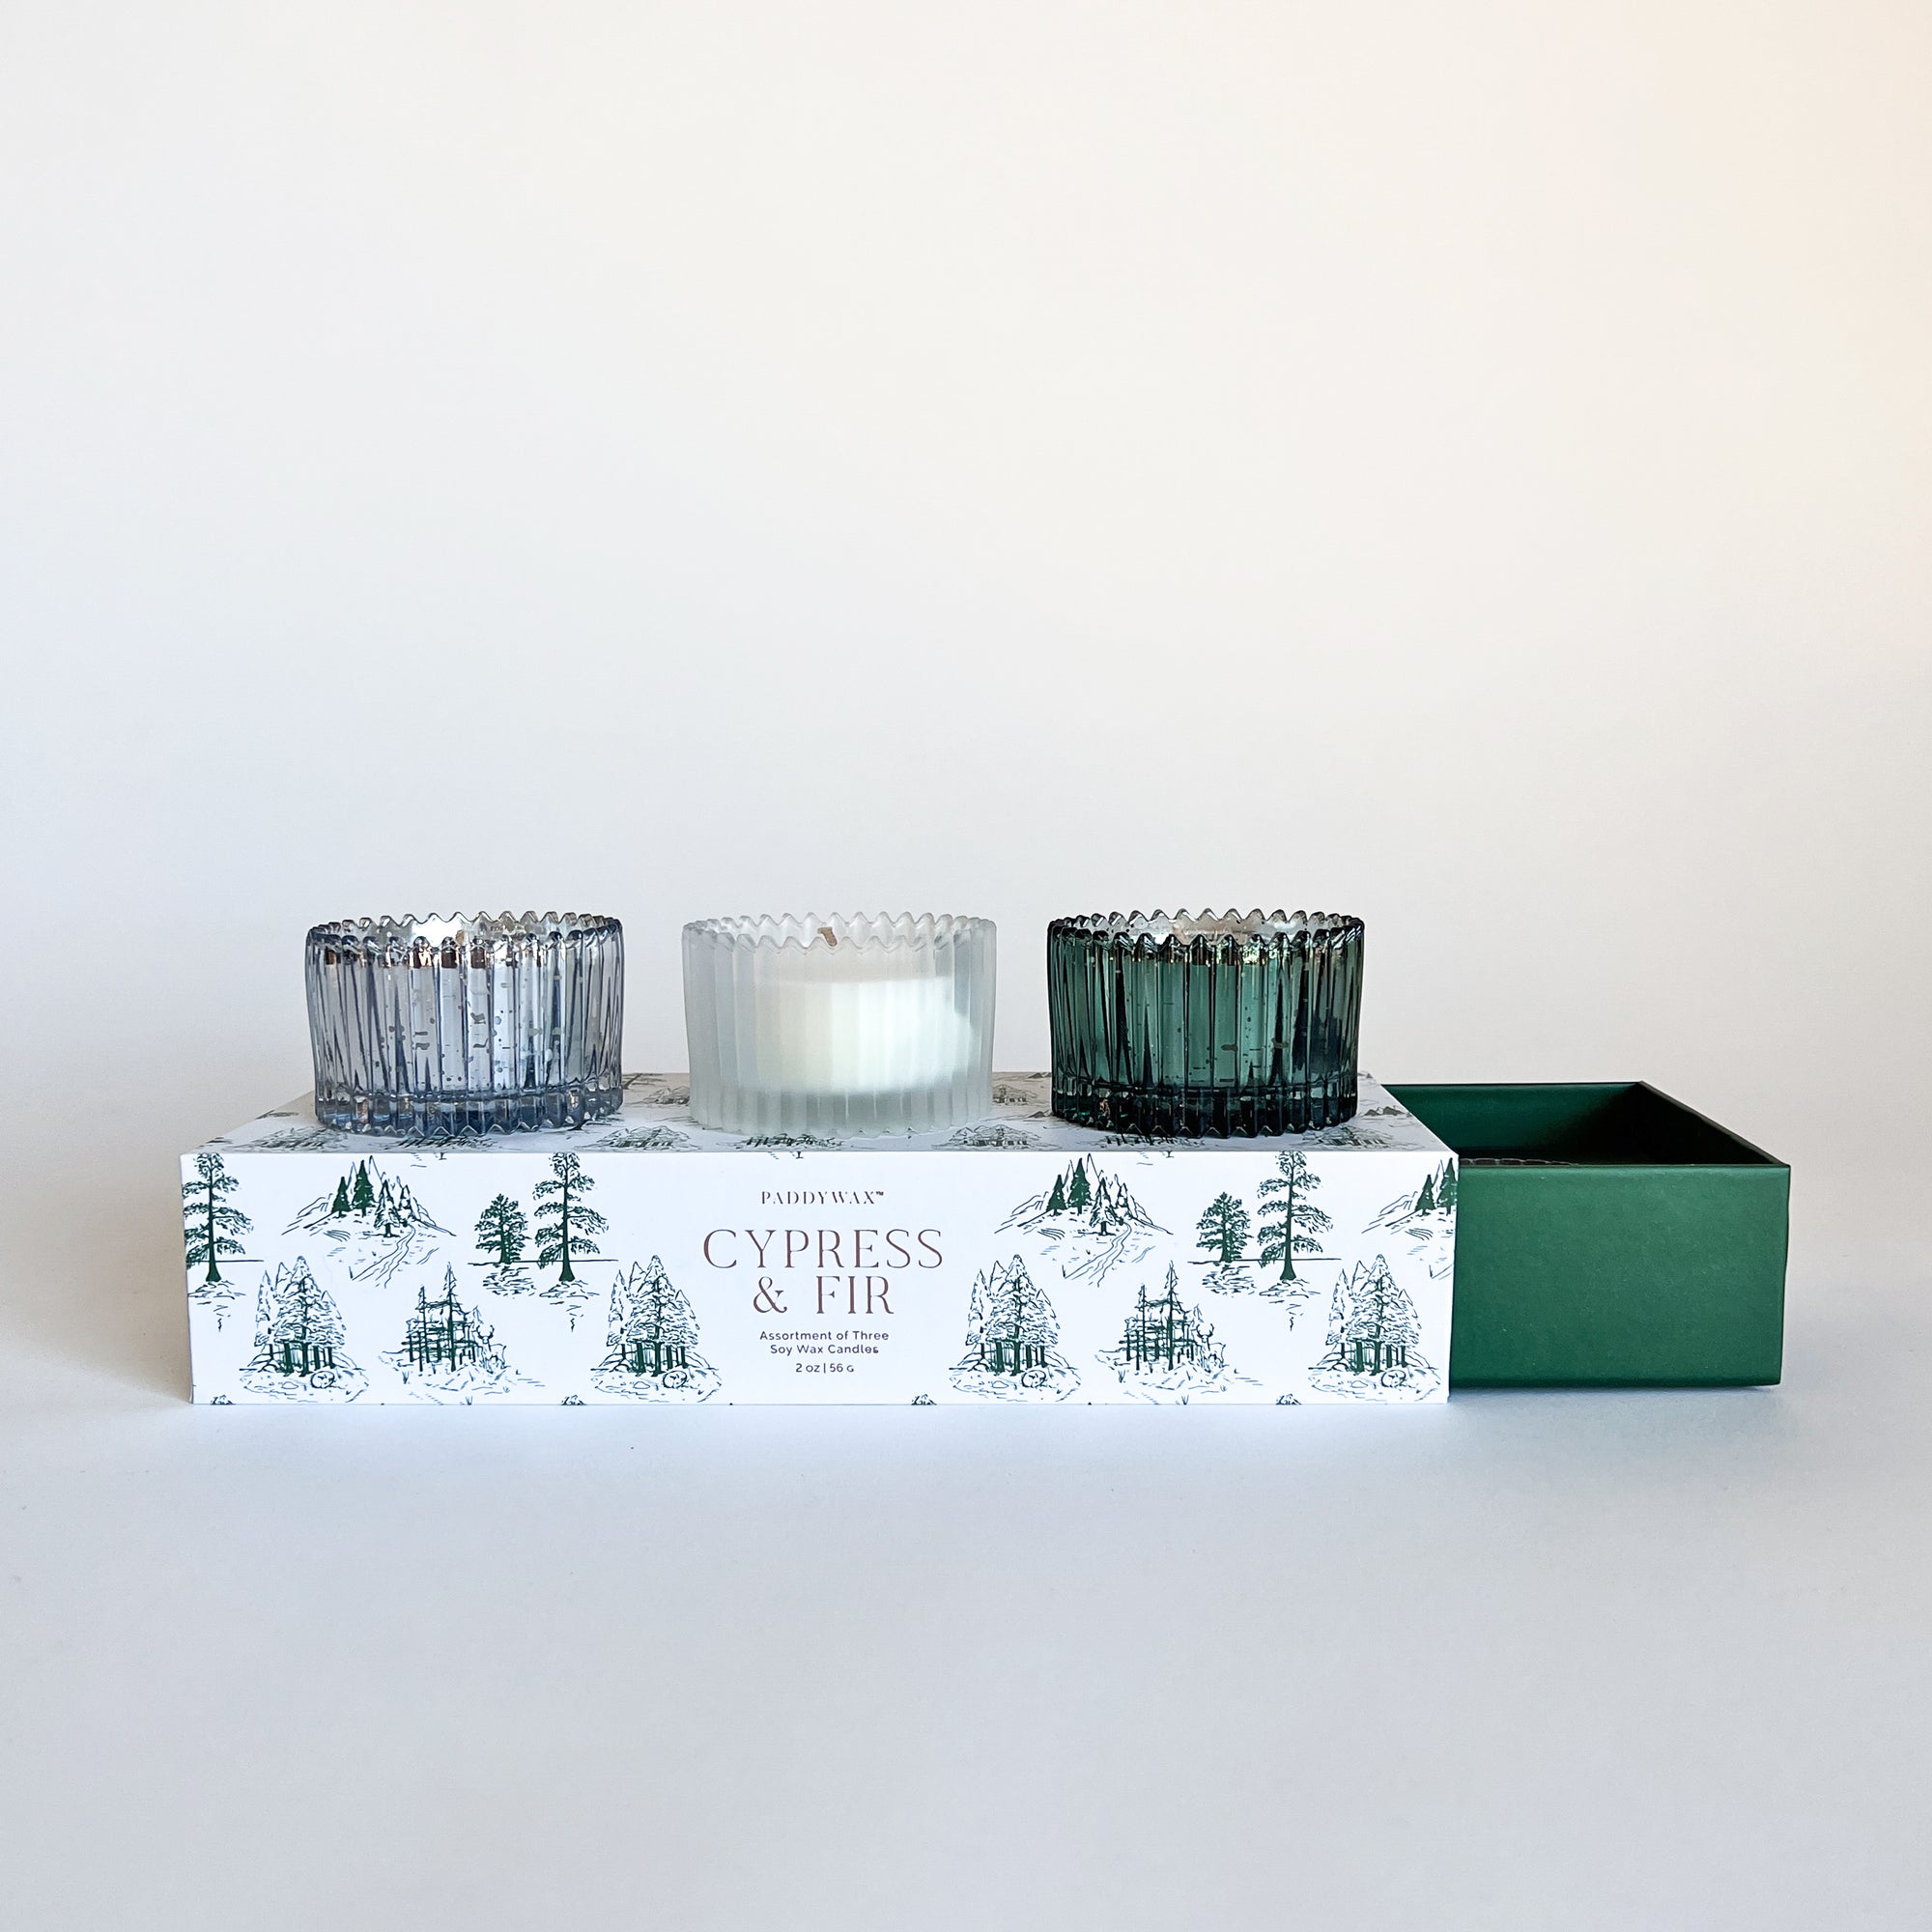 Paddywax Cypress + Fir - Gift Set of Three 2oz Mercury Glass Candles, $  35.00, Gifts That Give Back